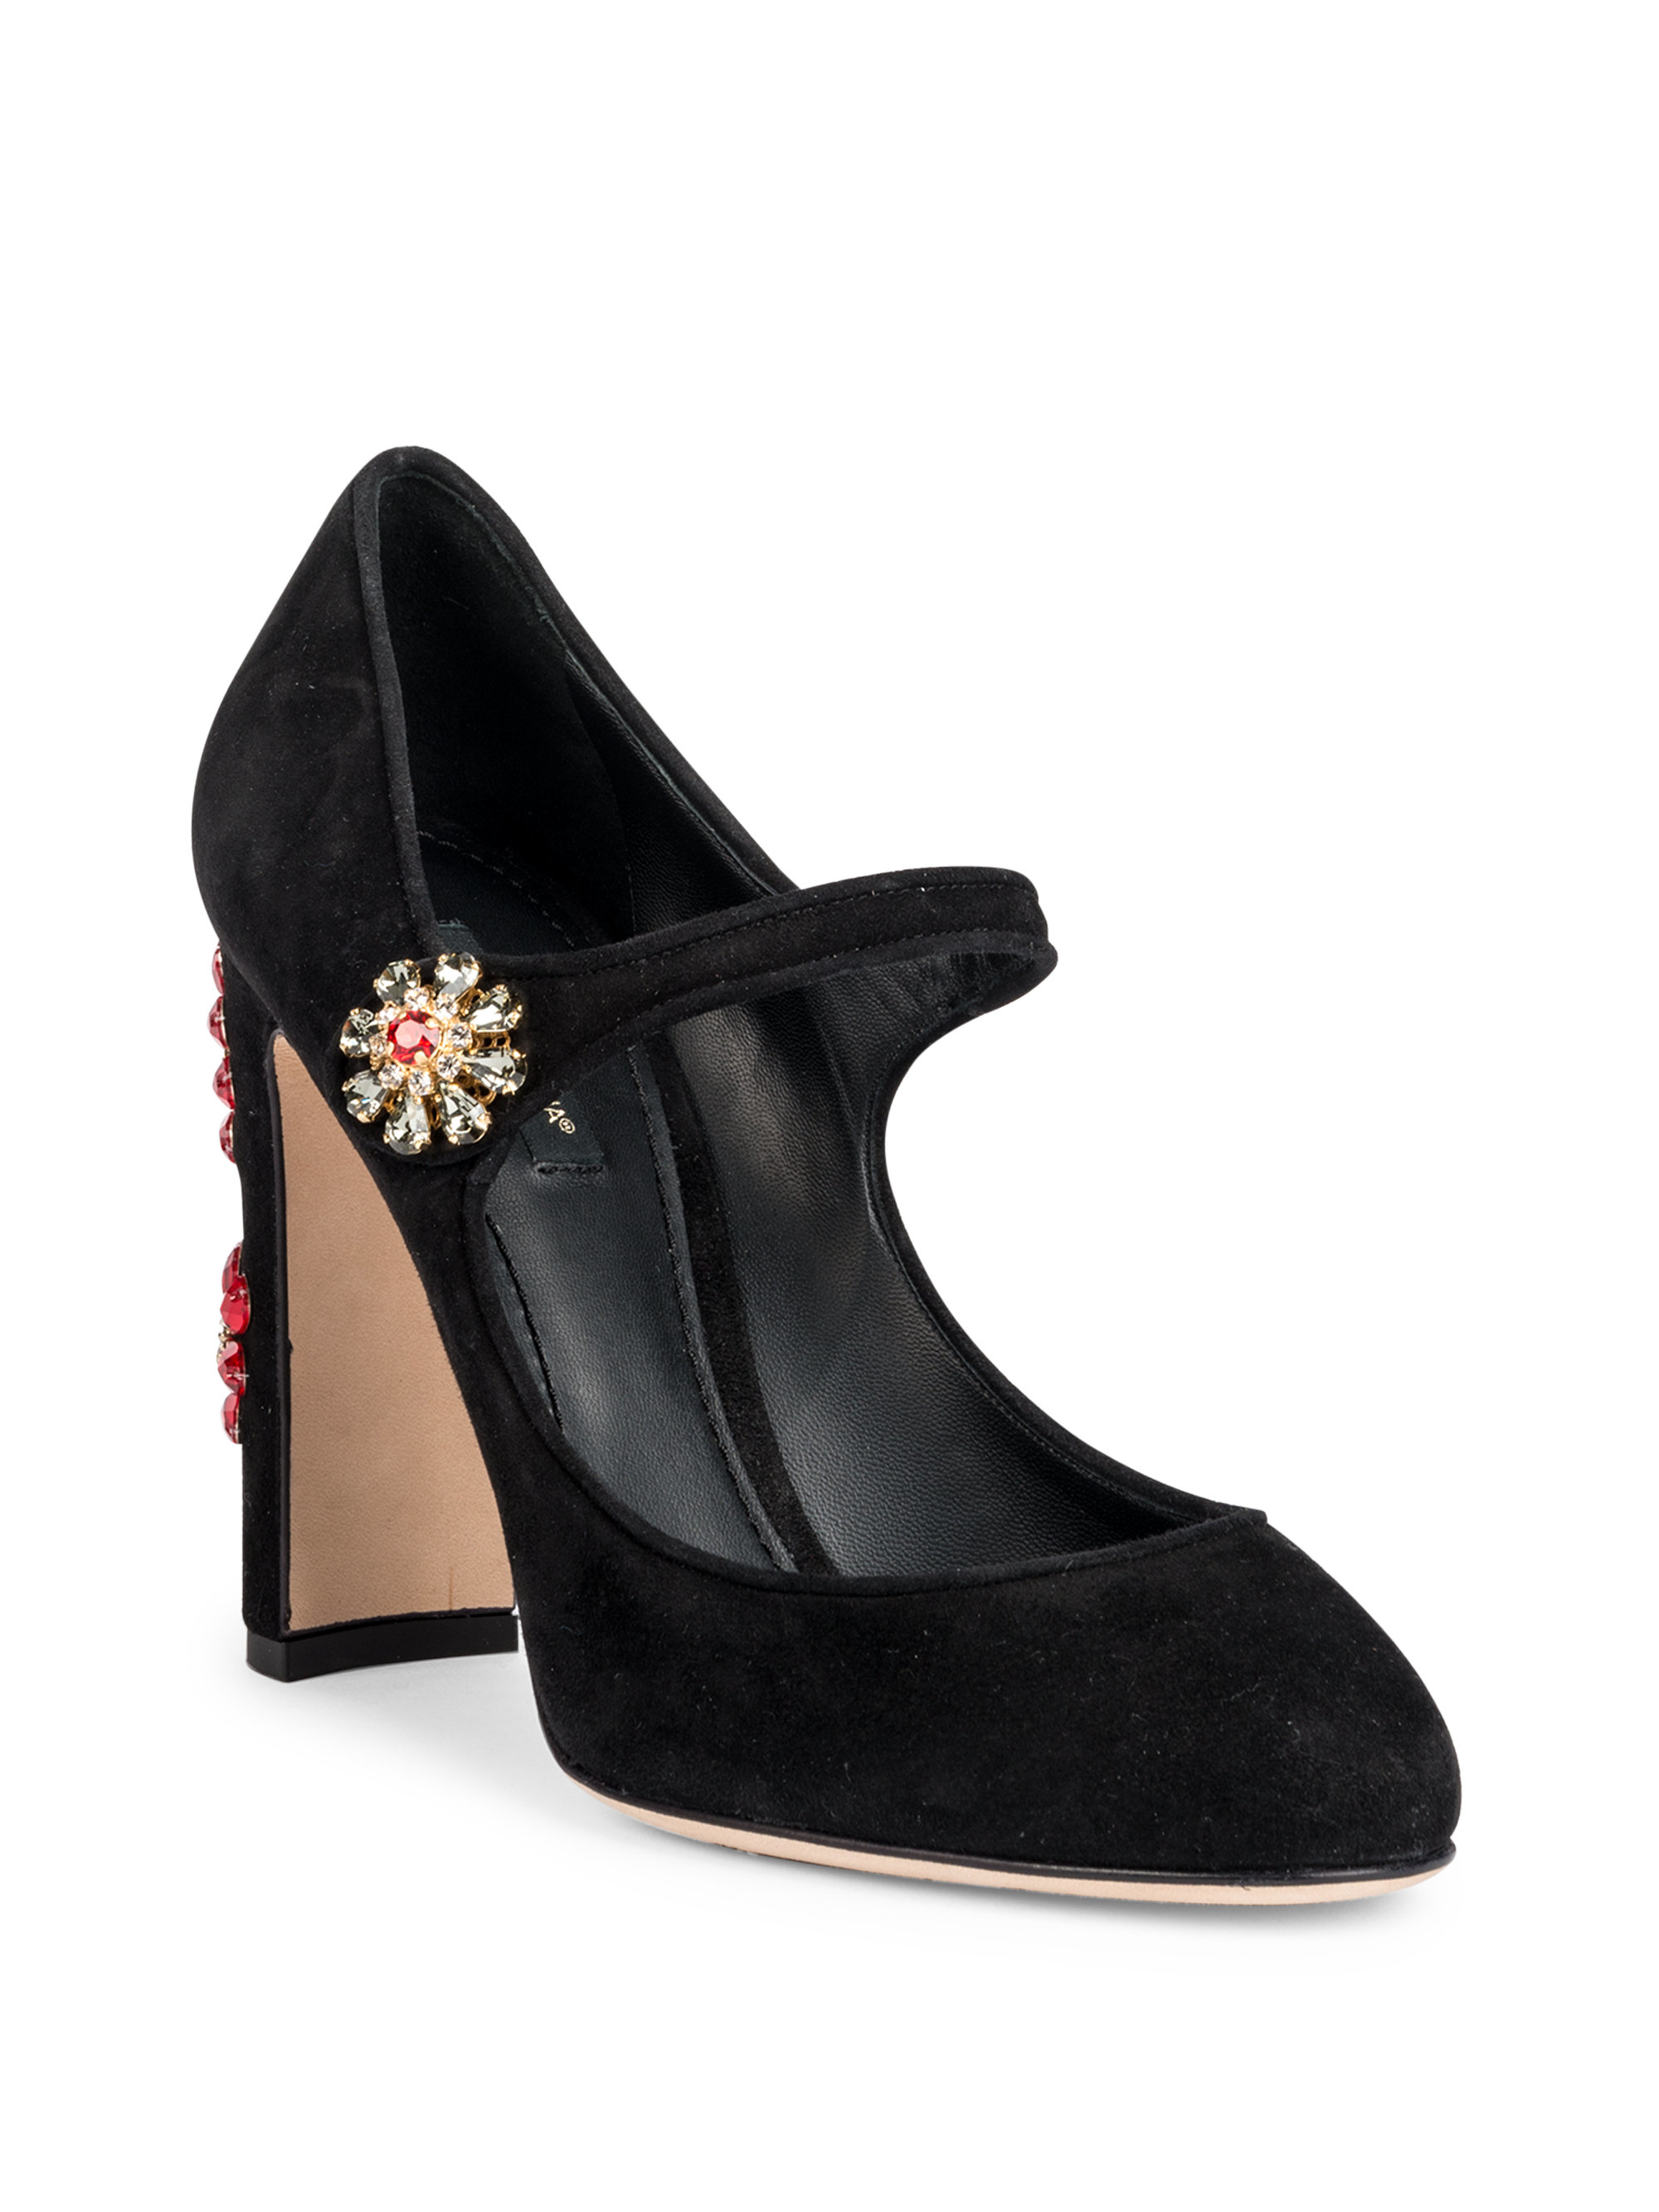 Hot Girl Shoes: Dolce And Gabbana Shoes Saks